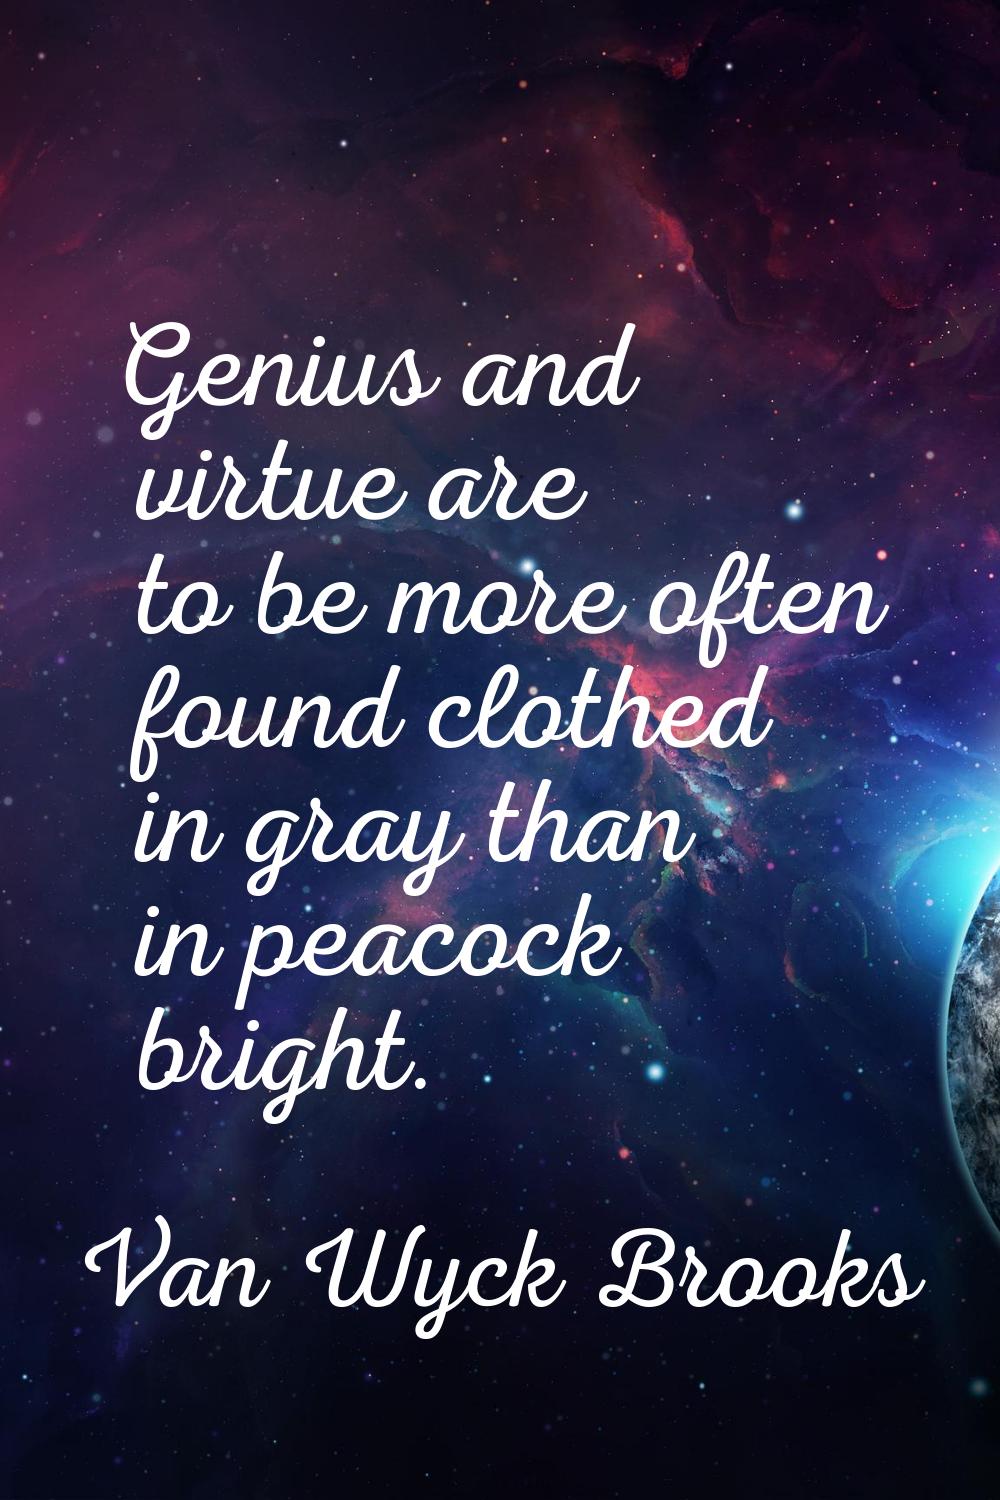 Genius and virtue are to be more often found clothed in gray than in peacock bright.